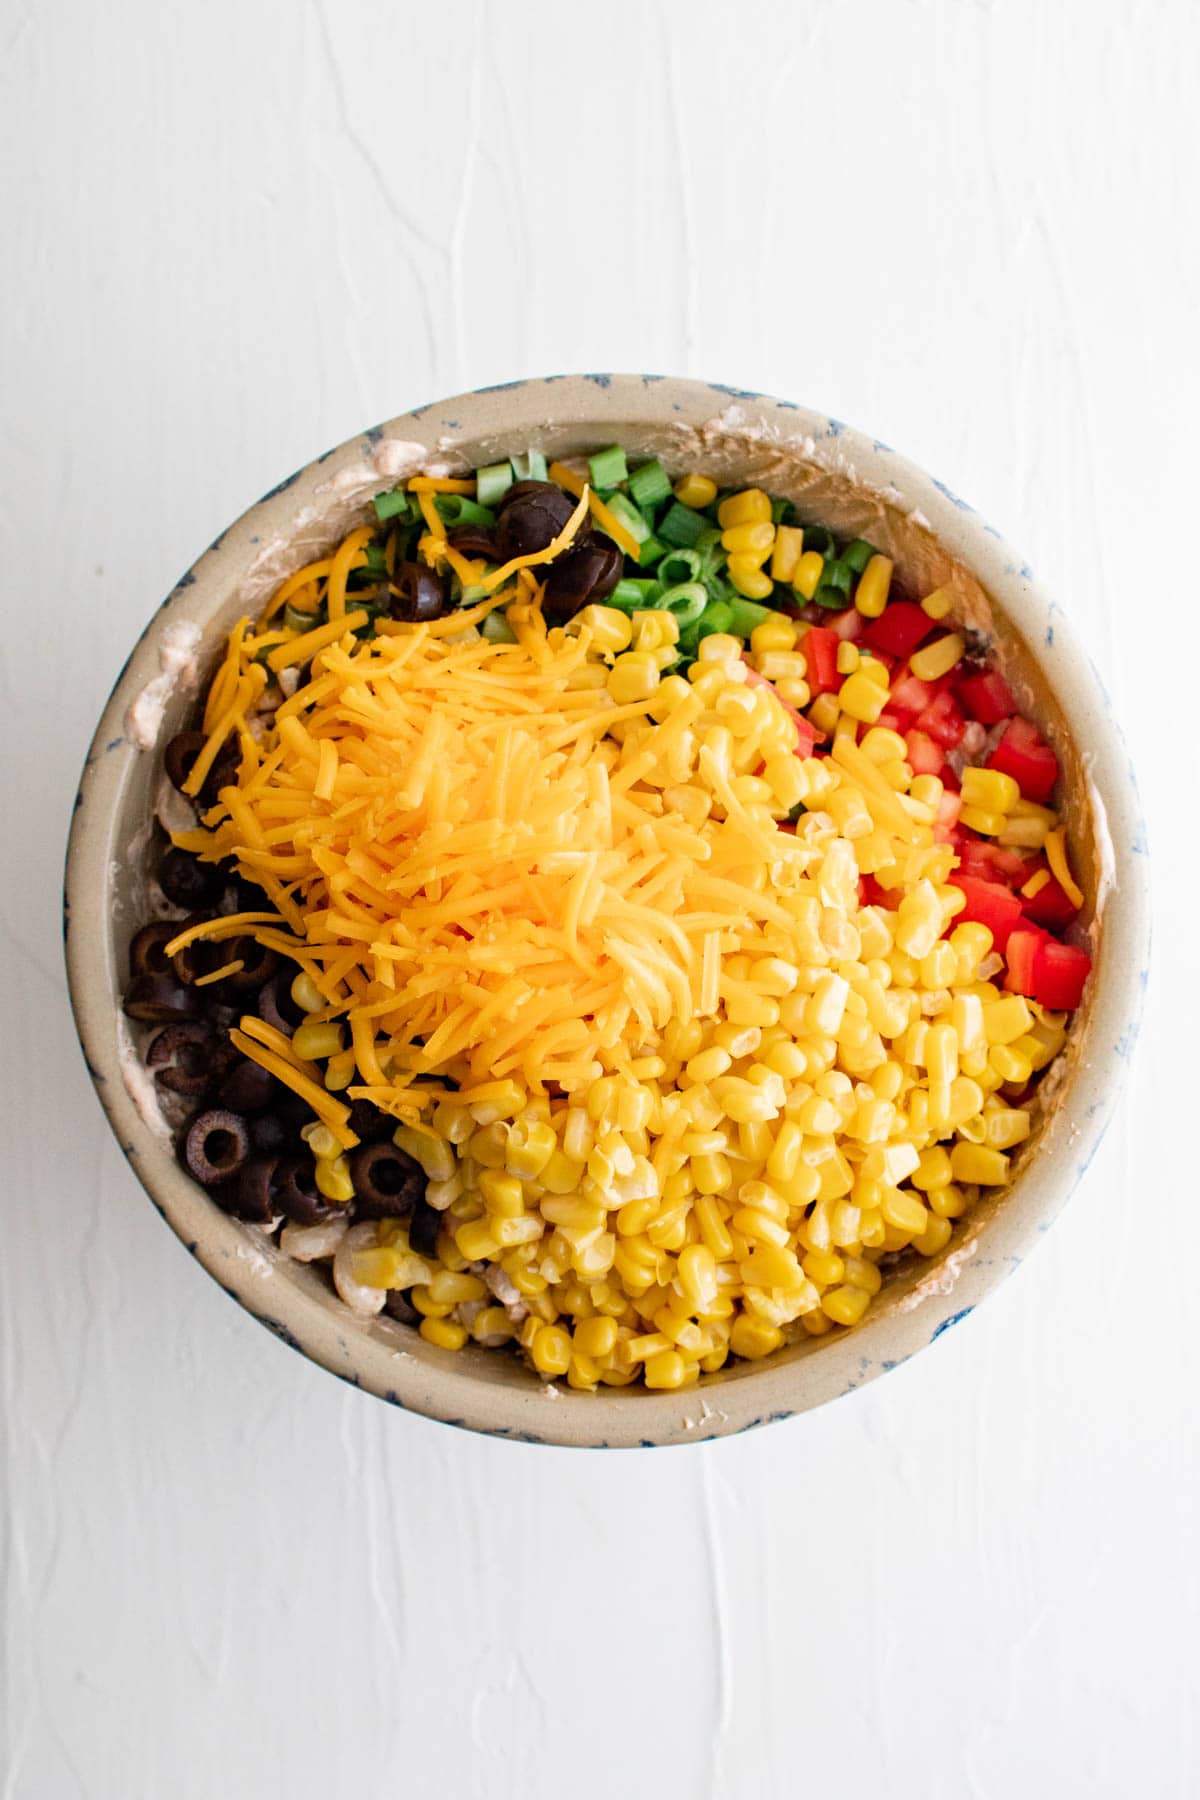 Olives, tomatoes, green onions, corn and shredded cheese in a large bowl.